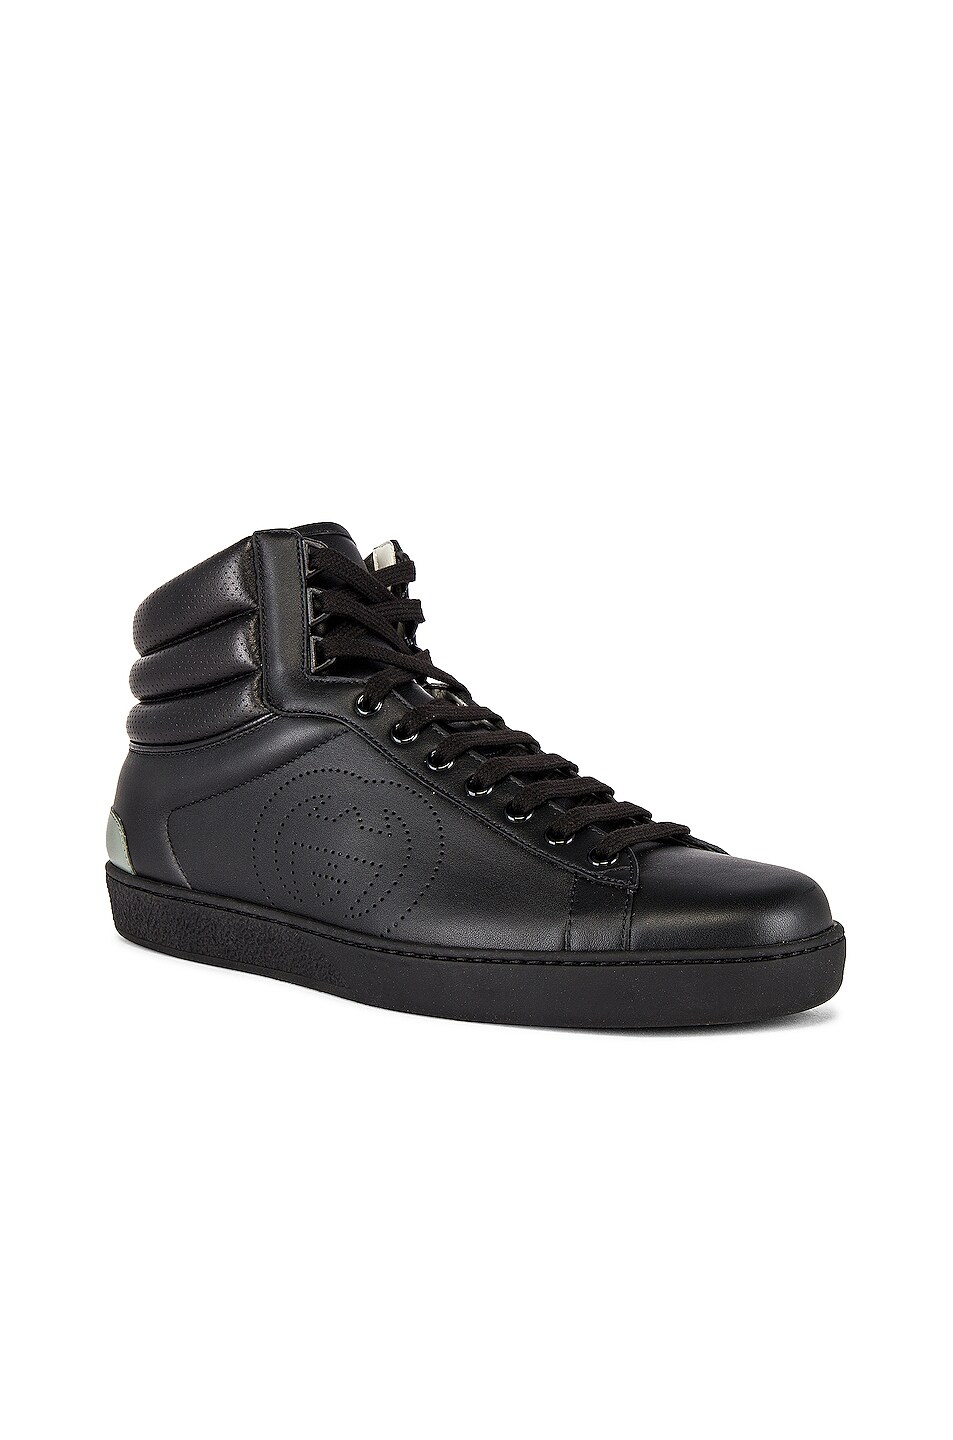 Image 1 of Gucci New Ace High Top Sneaker in Black & Grey